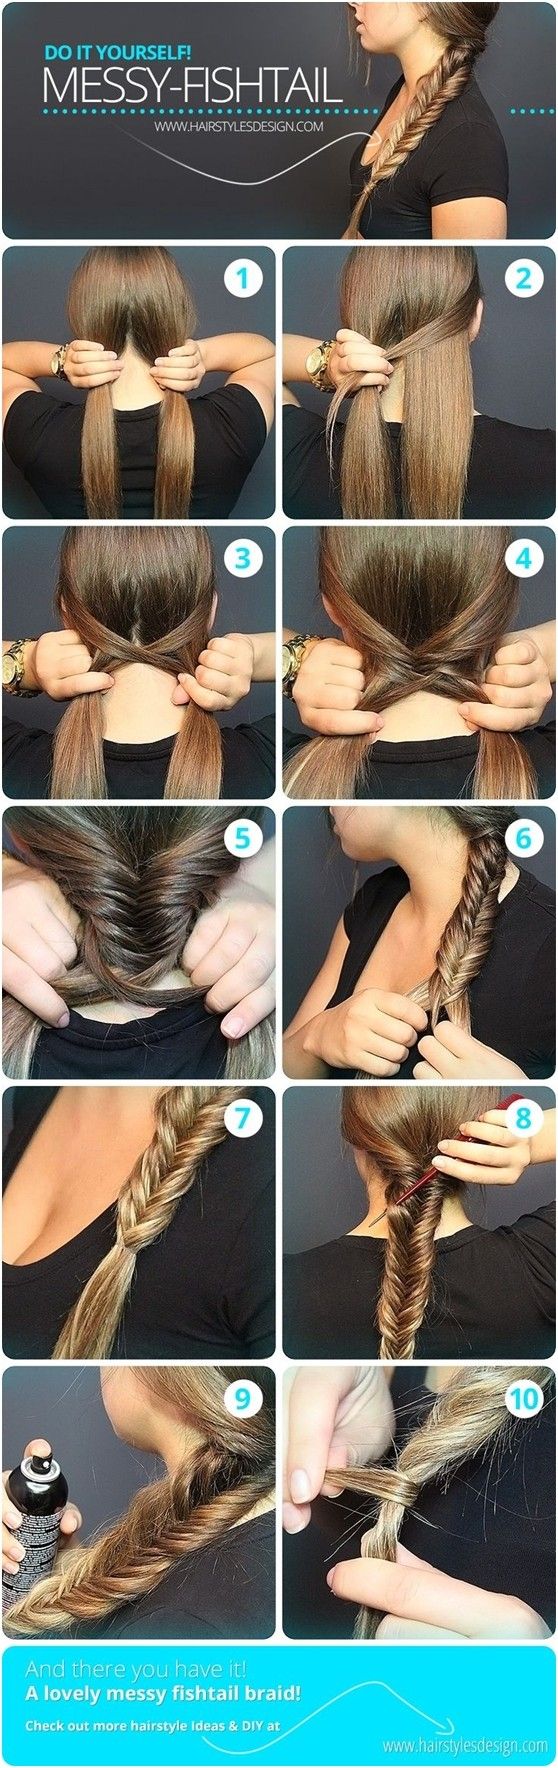 Girls school hairstyle: Fishtail braid - The Organised Housewife